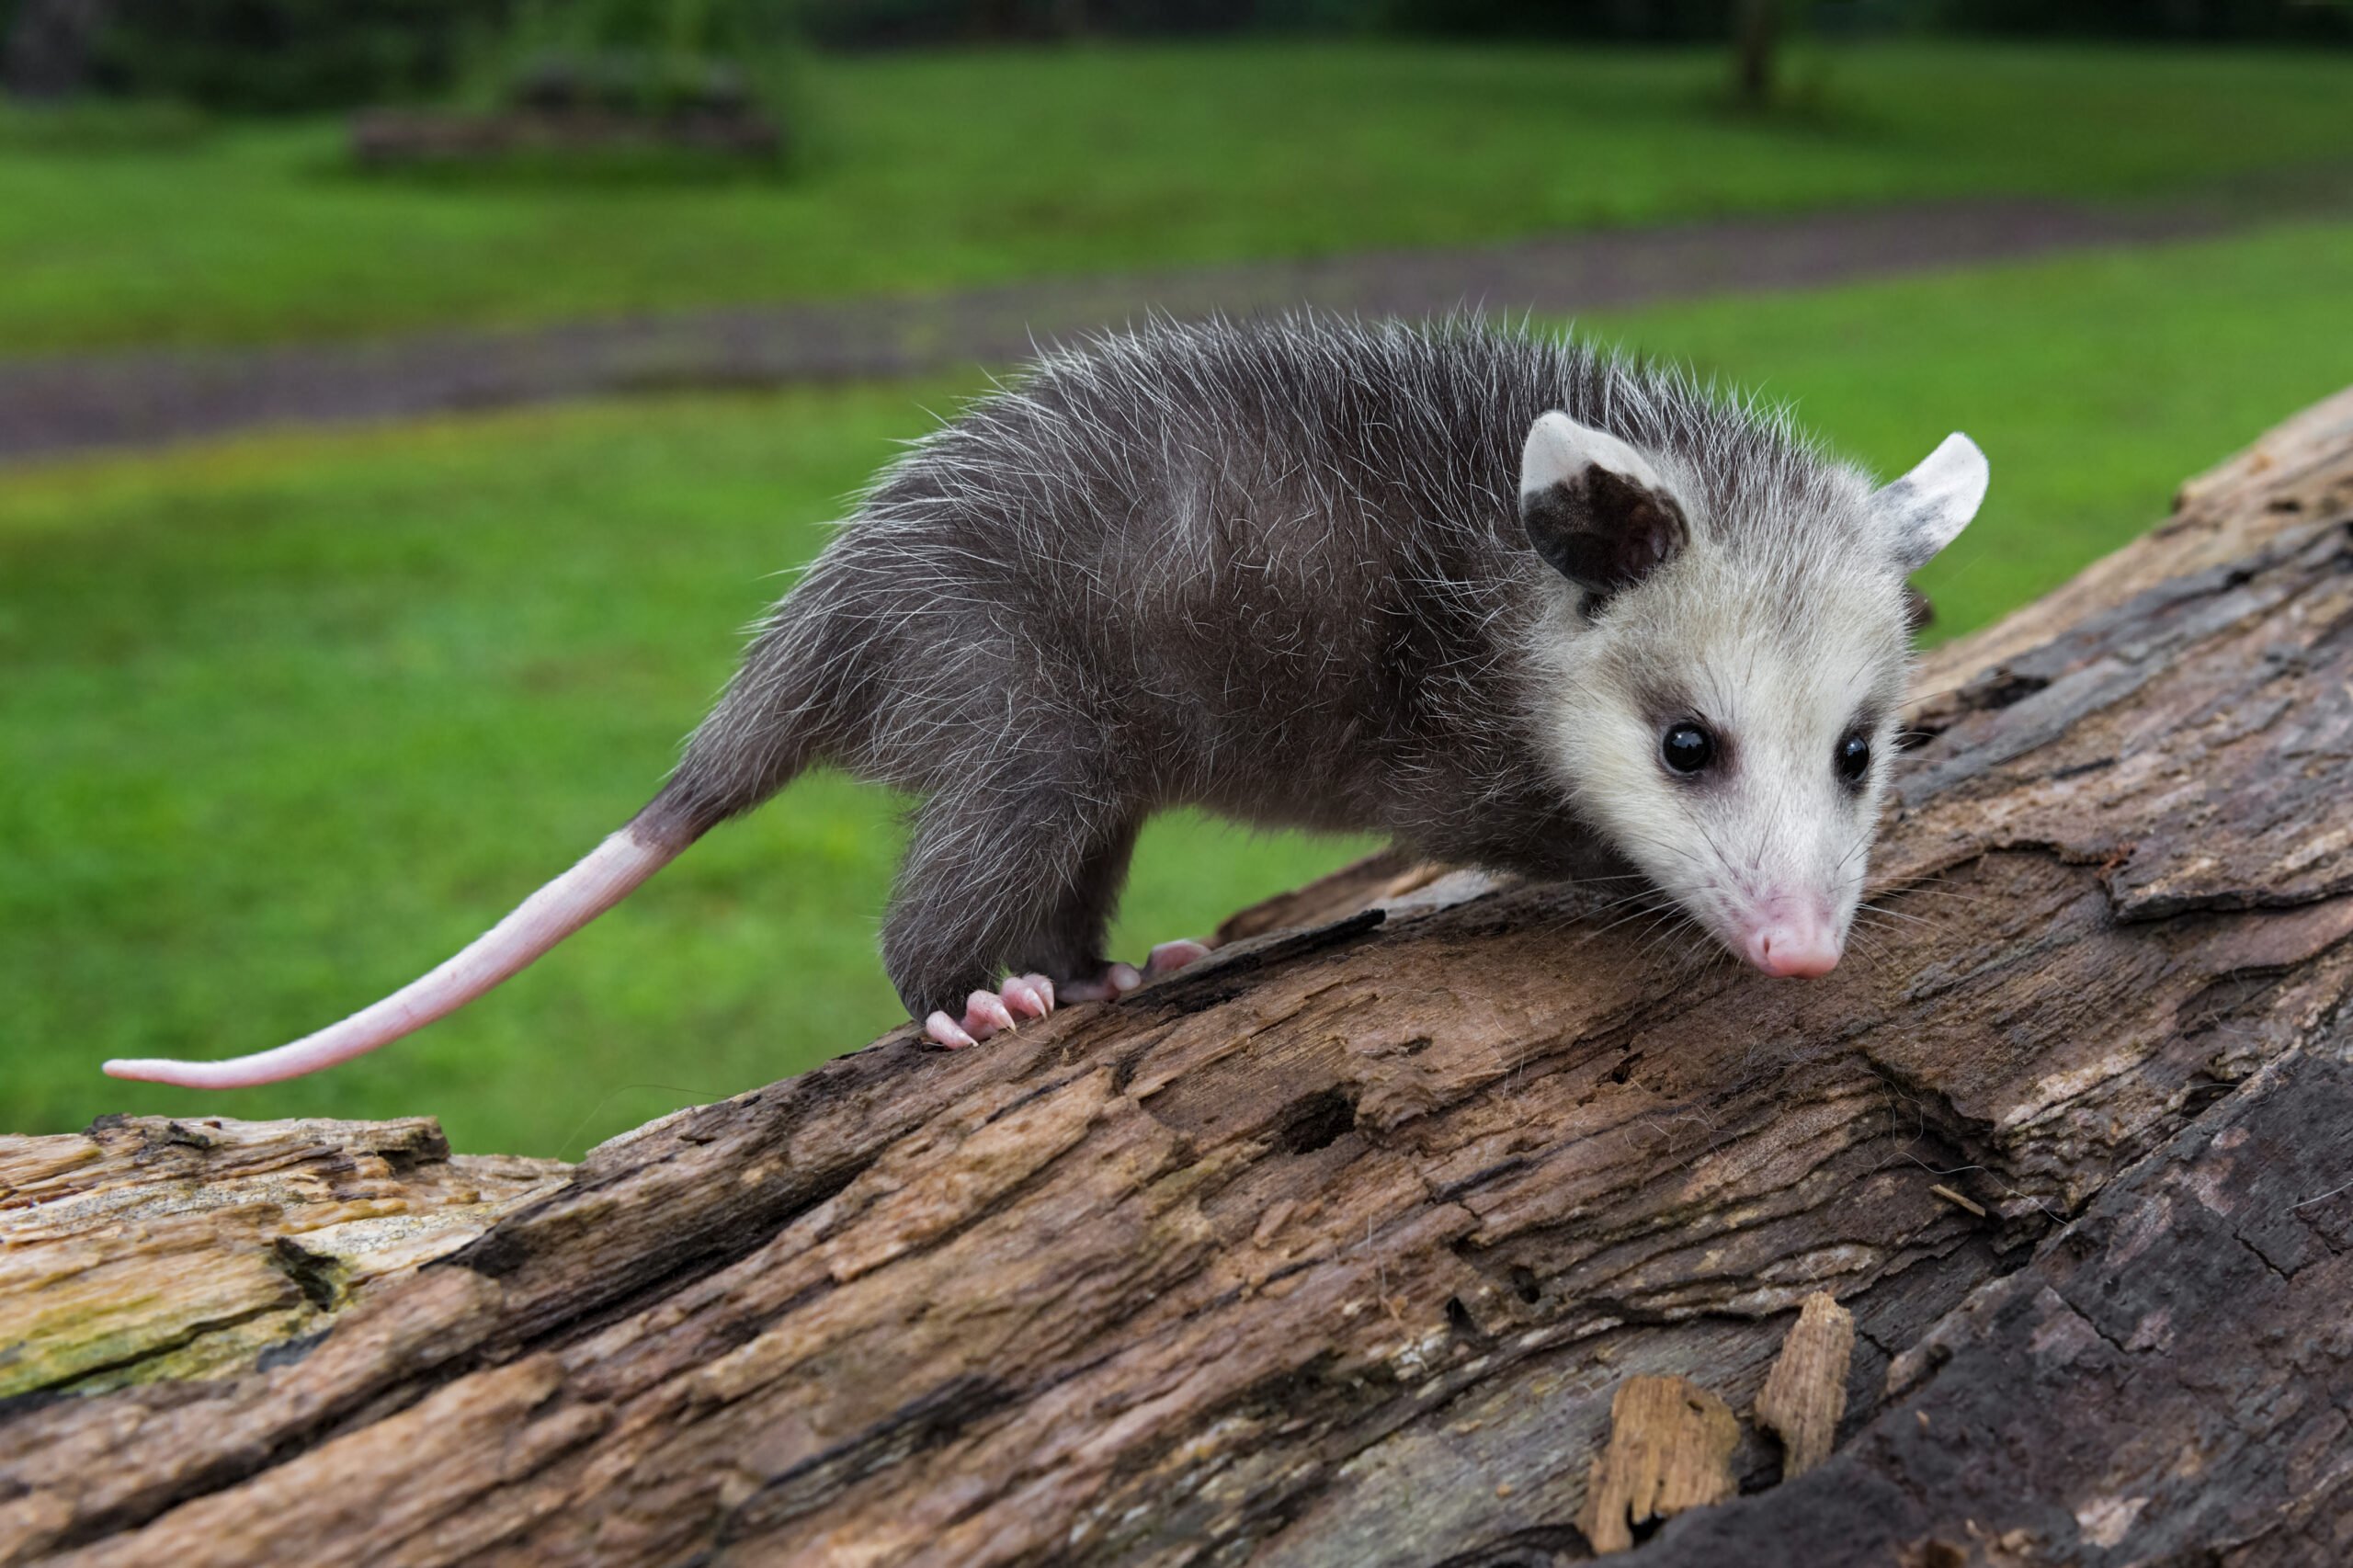 Virginia Opossum Joeys (Didelphis virginiana) stands a top a log.The animal is small and lanky.